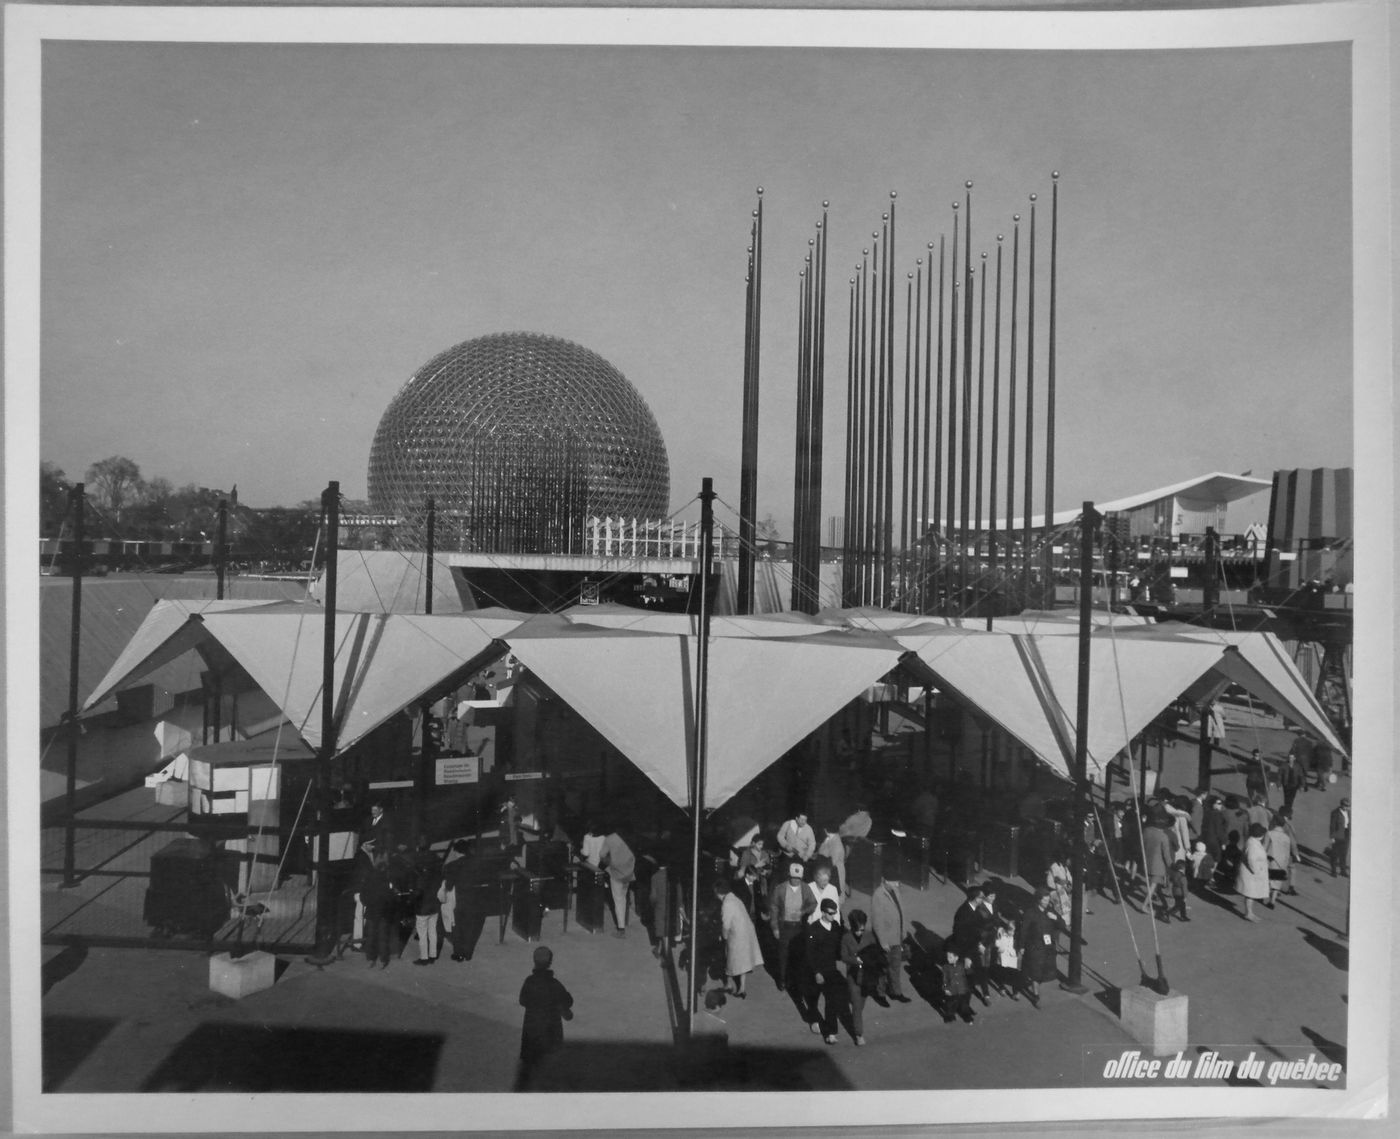 View of the entrance with the Pavilions of the United States and of the Soviet Union in background, Expo 67, Montréal, Québec